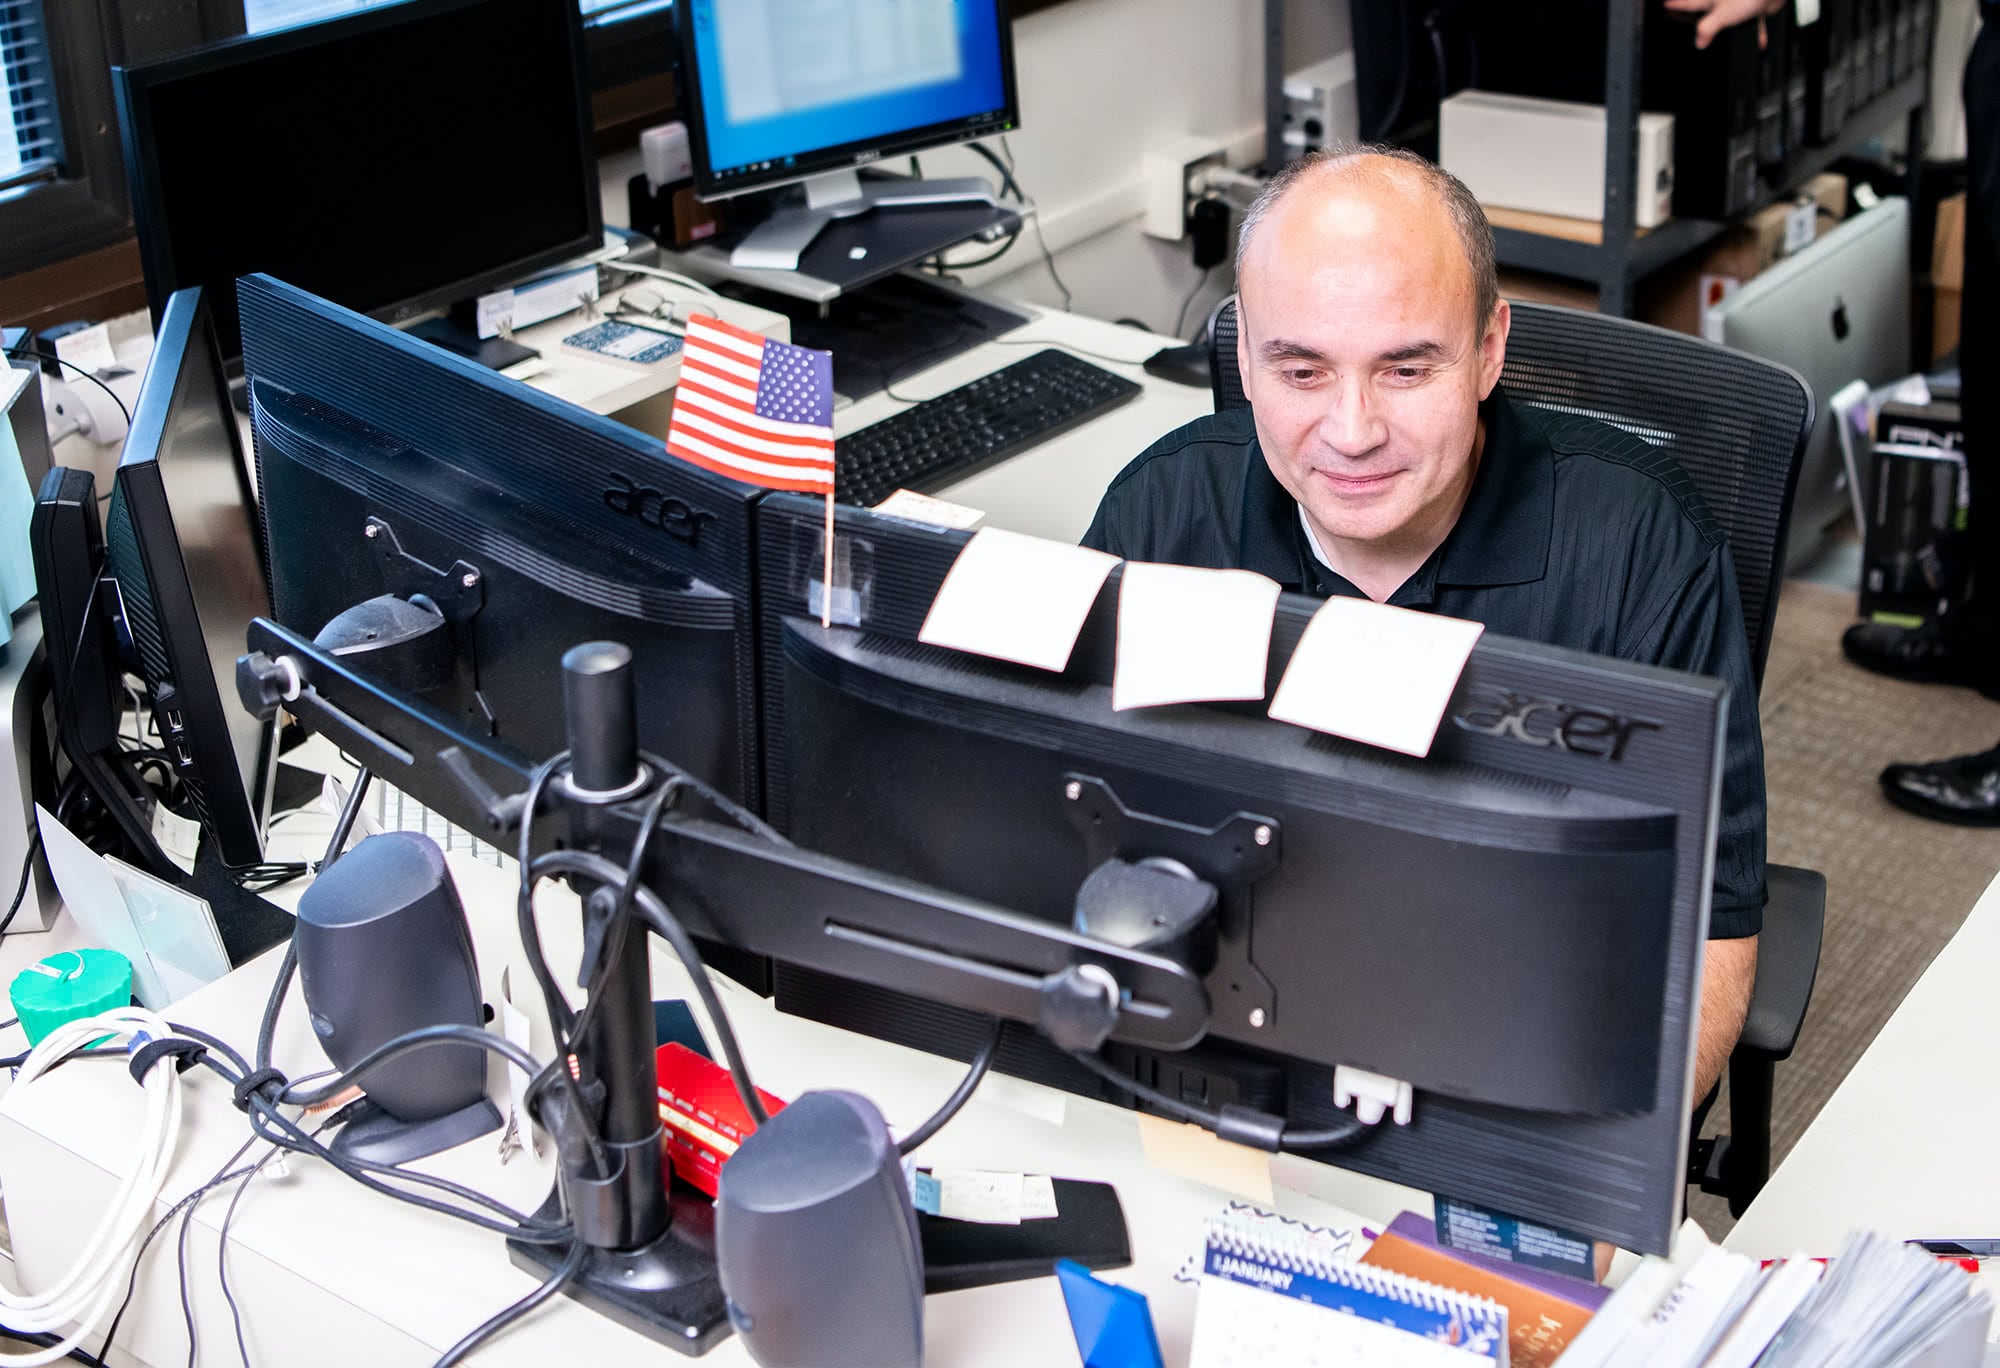 IT staff member works behind two computer monitors at his desk.